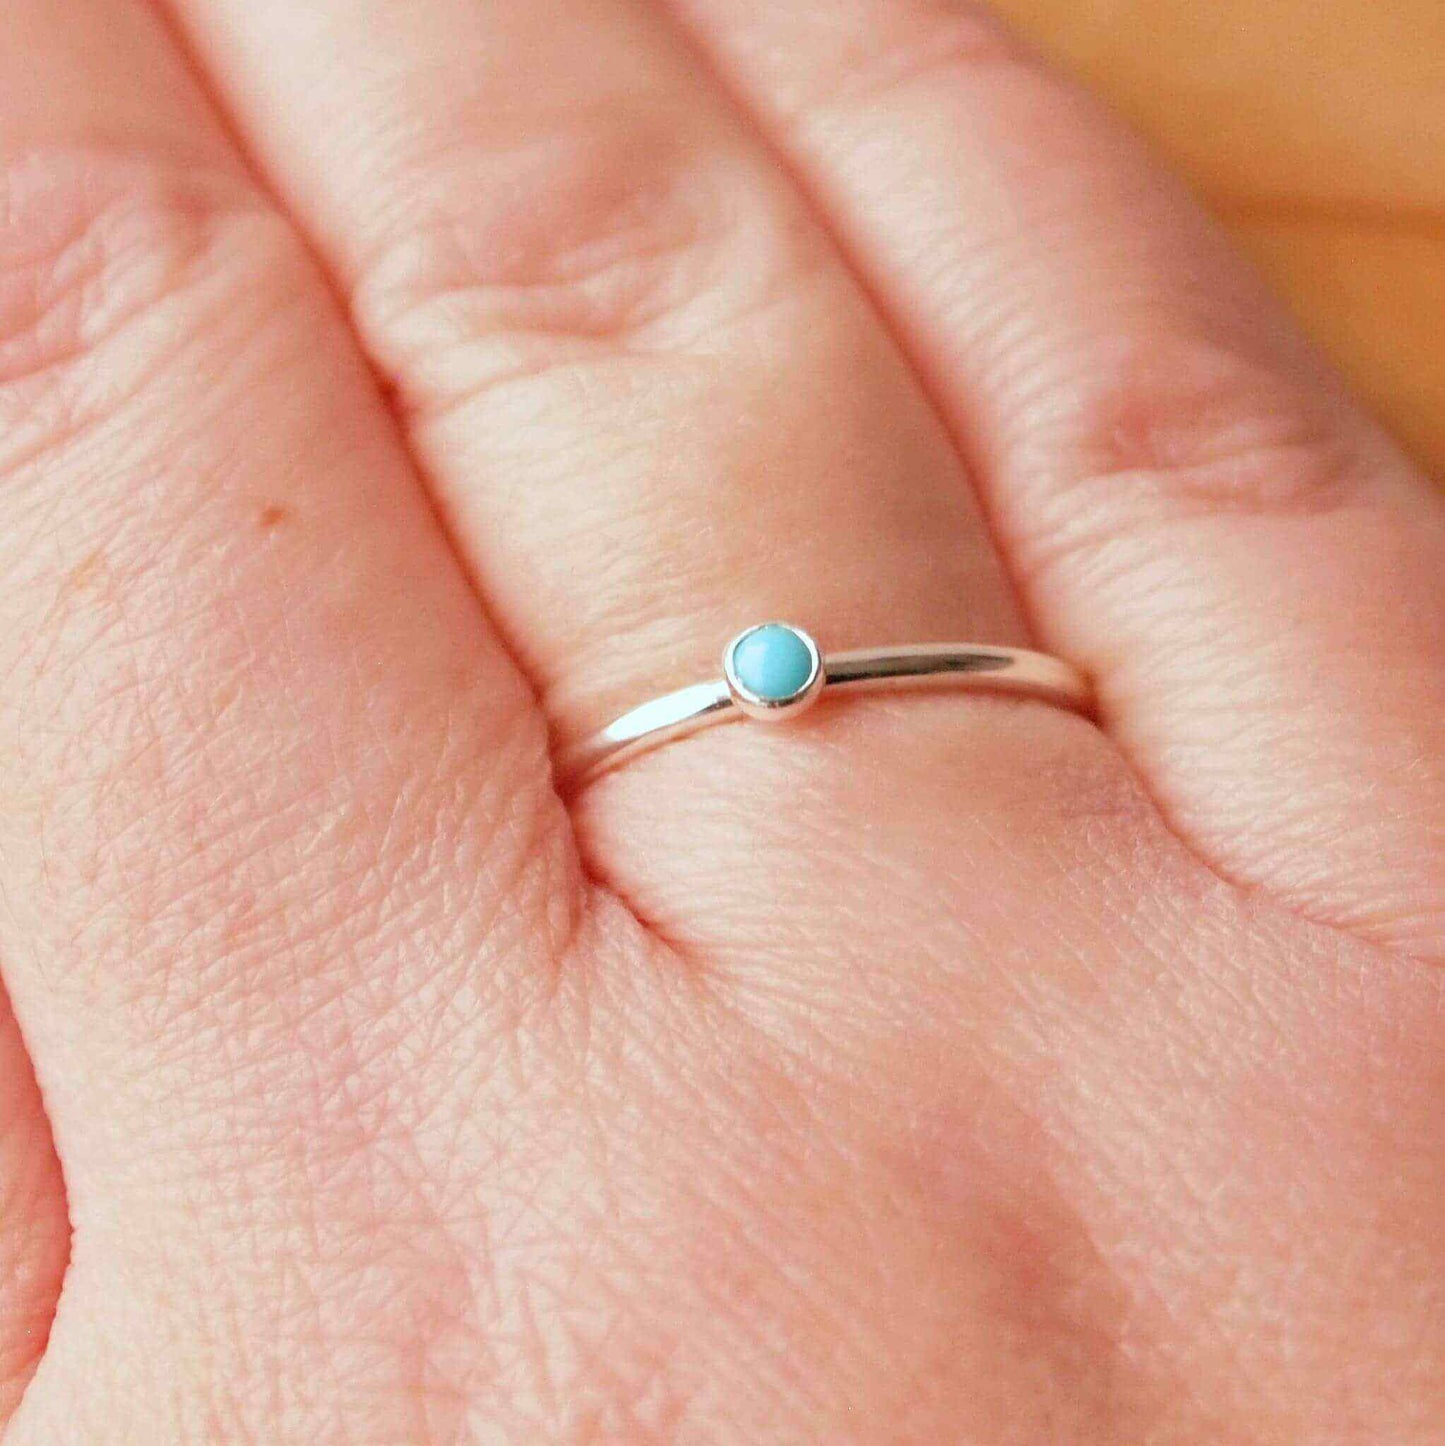 Turquoise Sterling Silver Gemstone ring with a round 3mm cabochon in Turquoise, Birthstone for December. Handmade in Scotland by maram jewellery